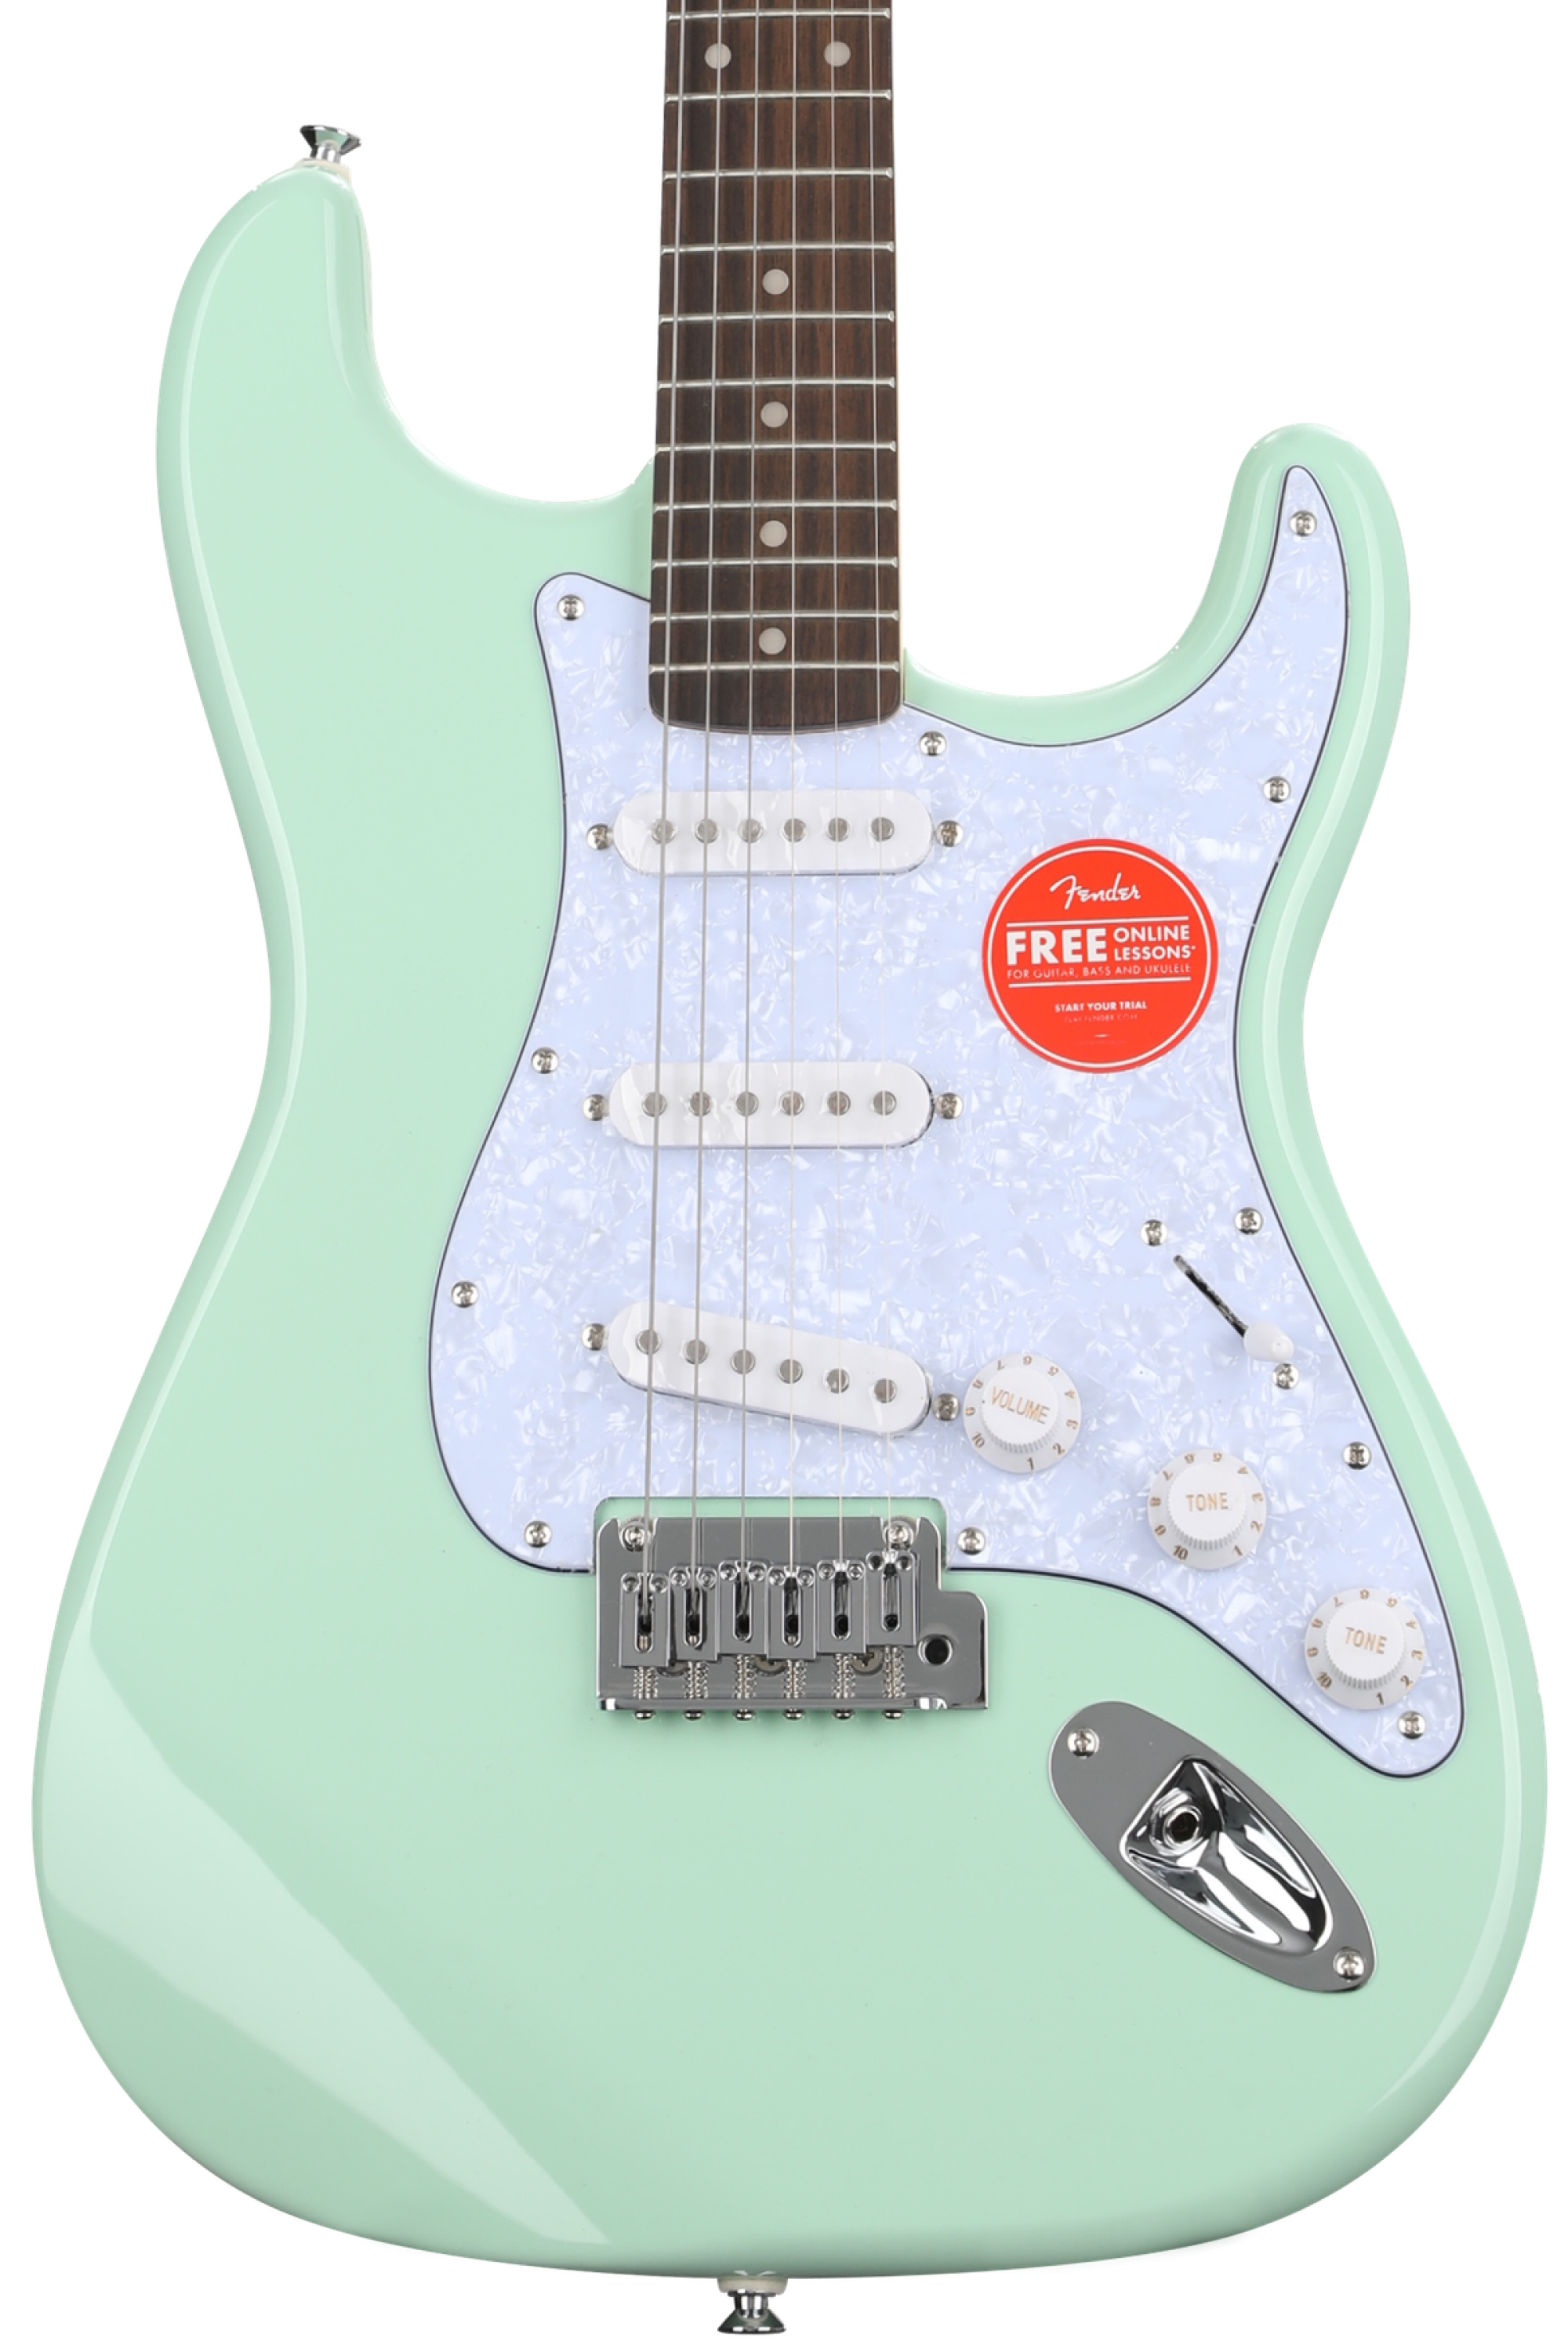 Squier Affinity Series Stratocaster - Surf Green with White